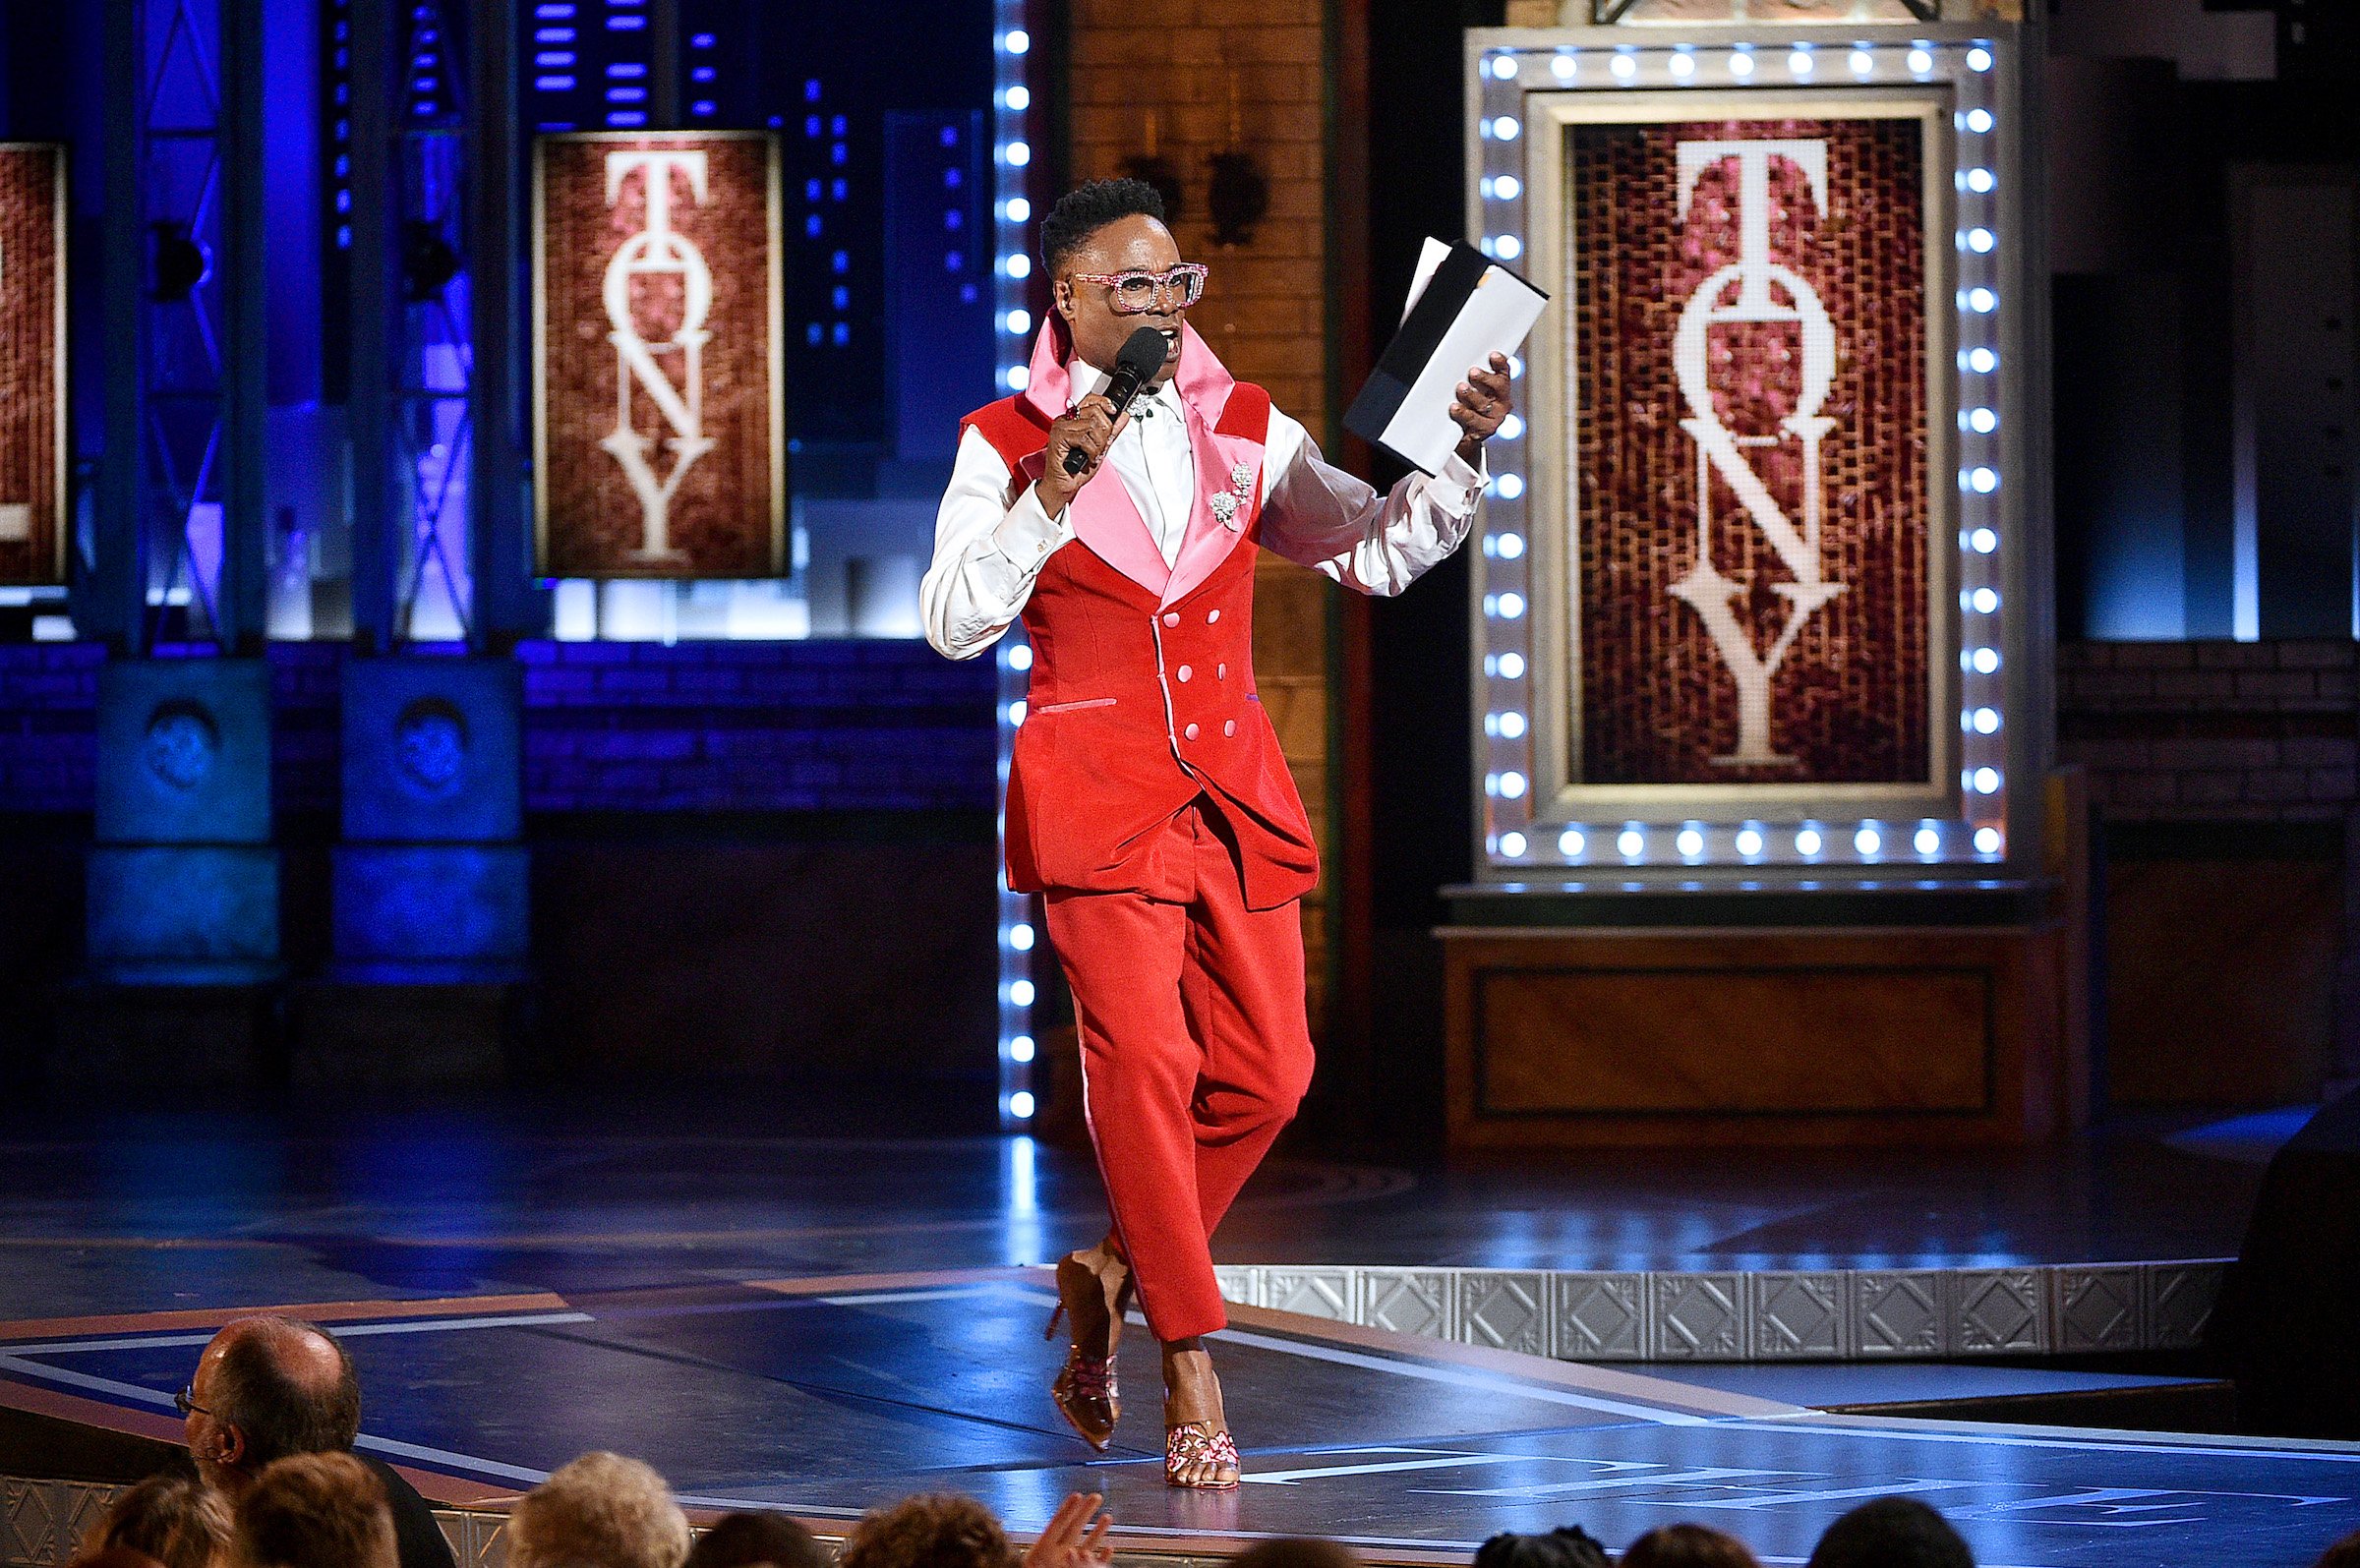 Billy Porter in a red suit performs on stage during the 2019 Tony Awards at Radio City Music Hall